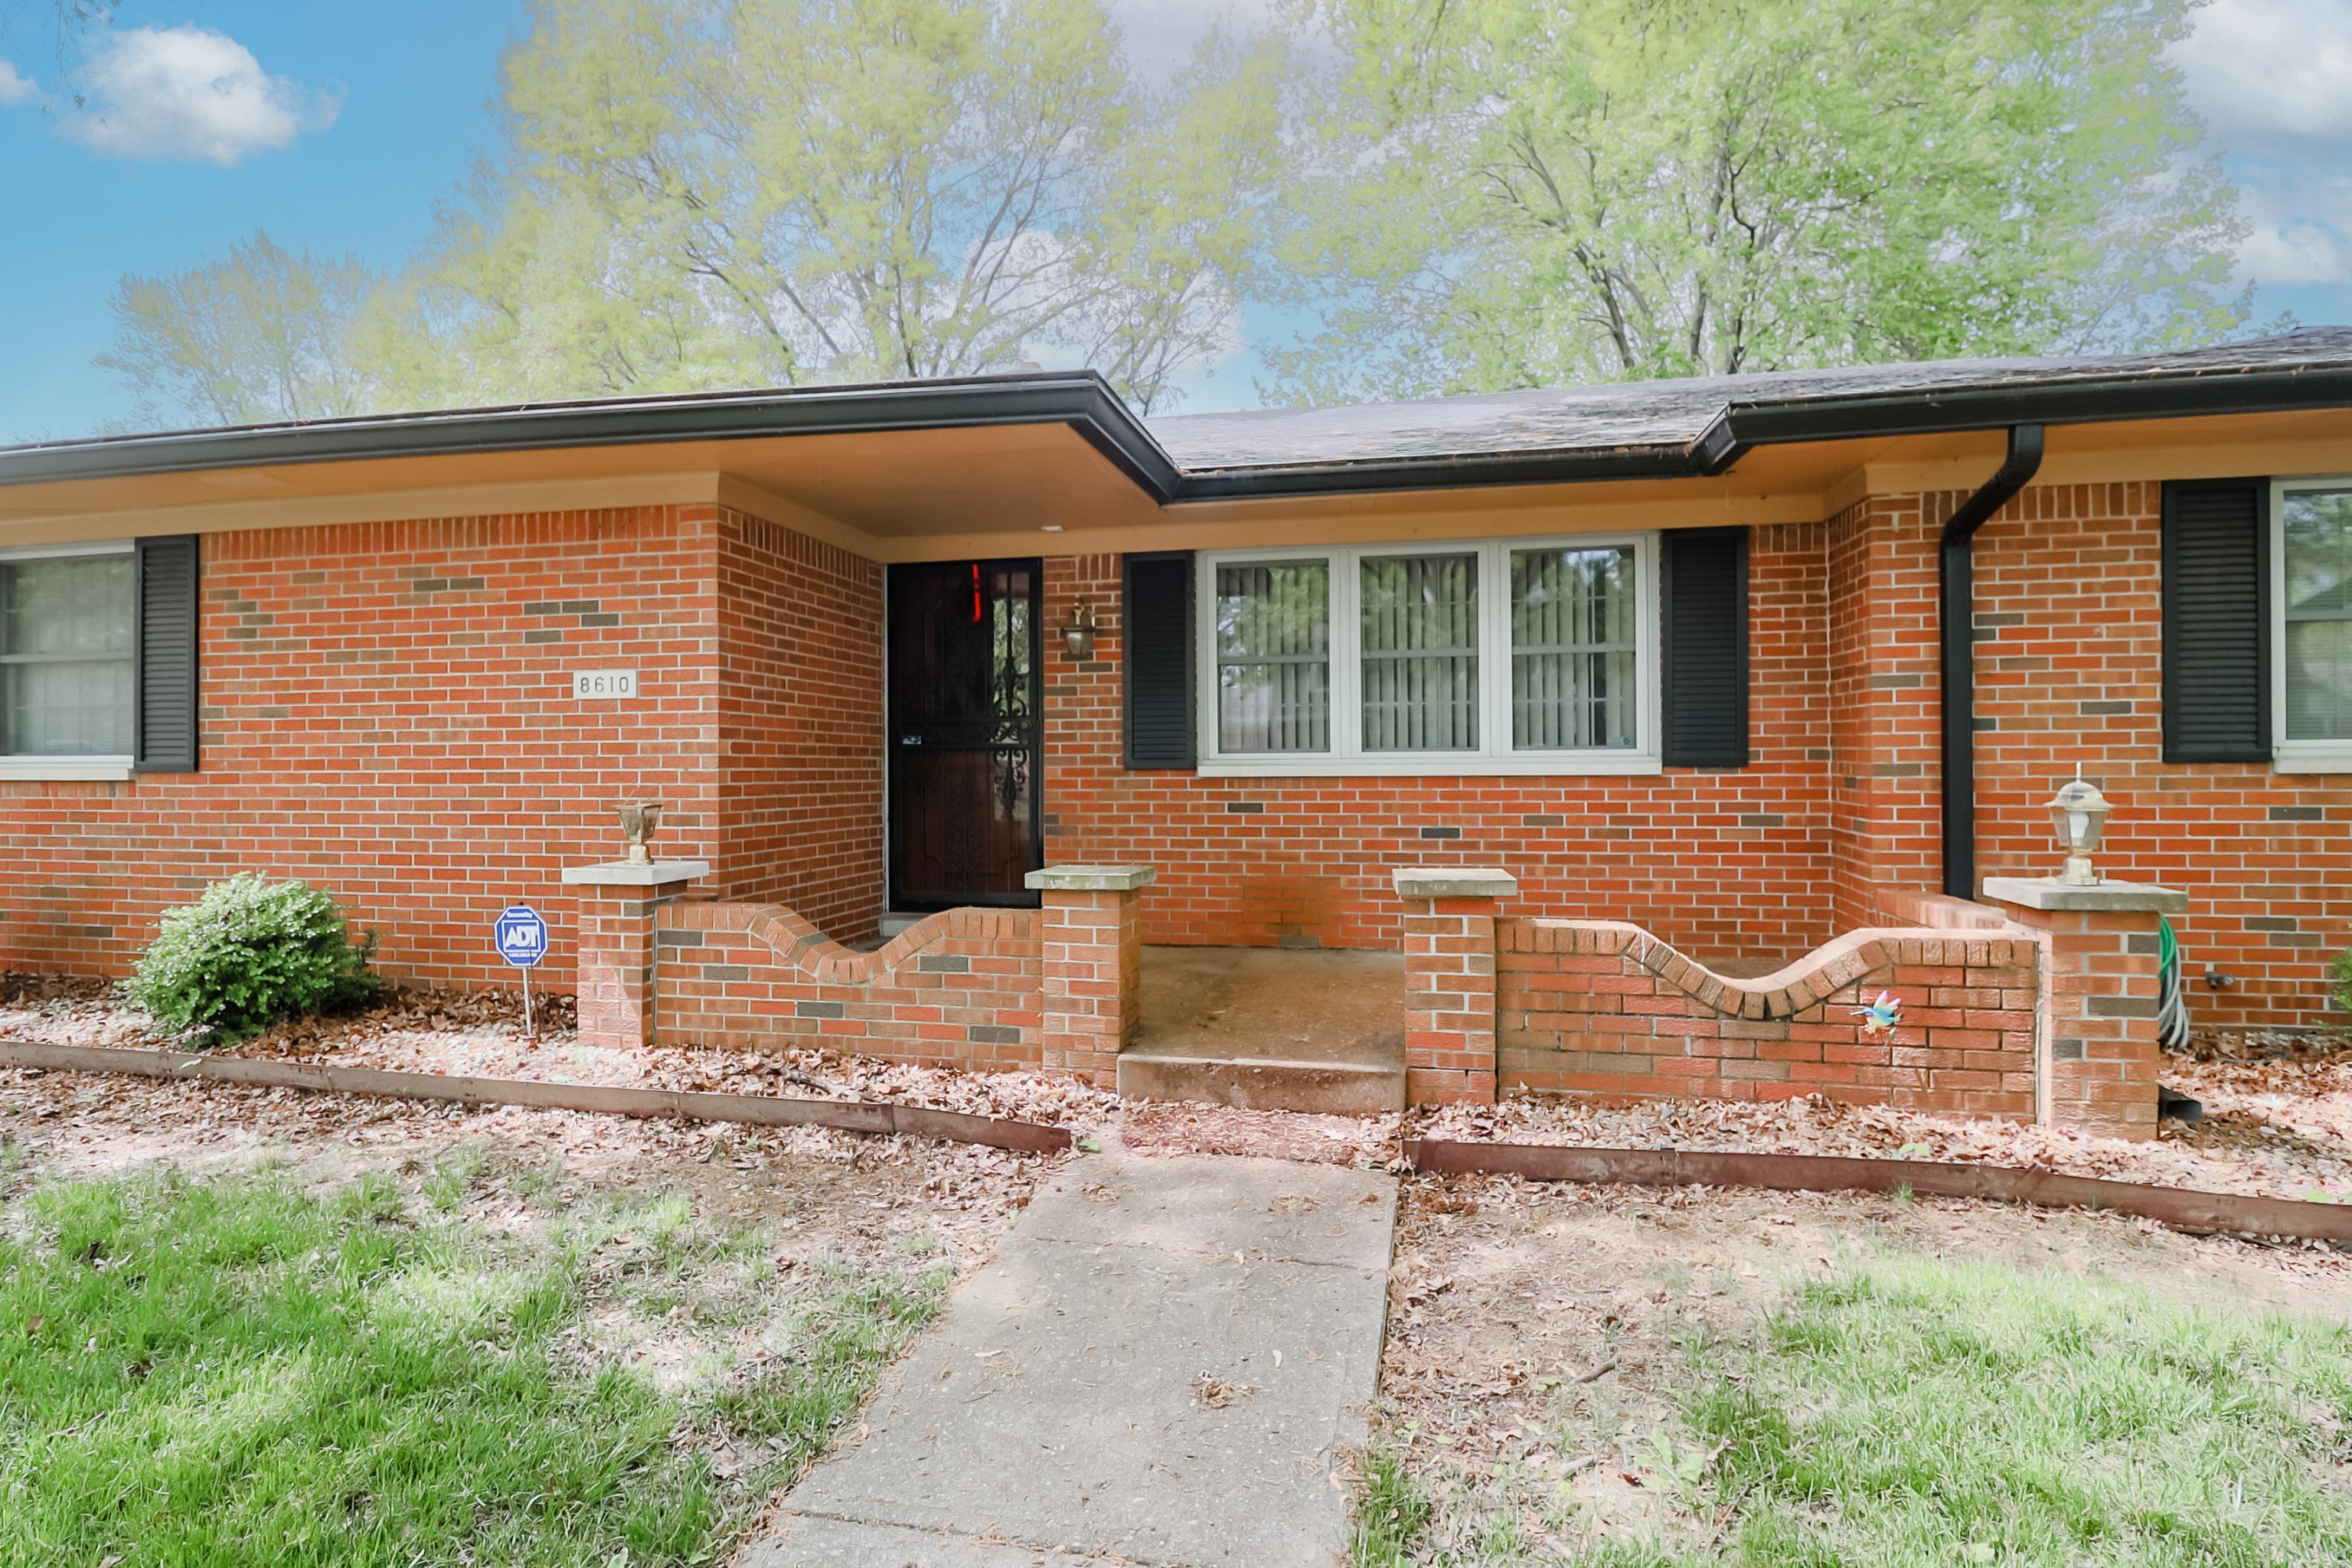 Photo one of 8610 Royal Meadow Dr Indianapolis IN 46217 | MLS 21977256